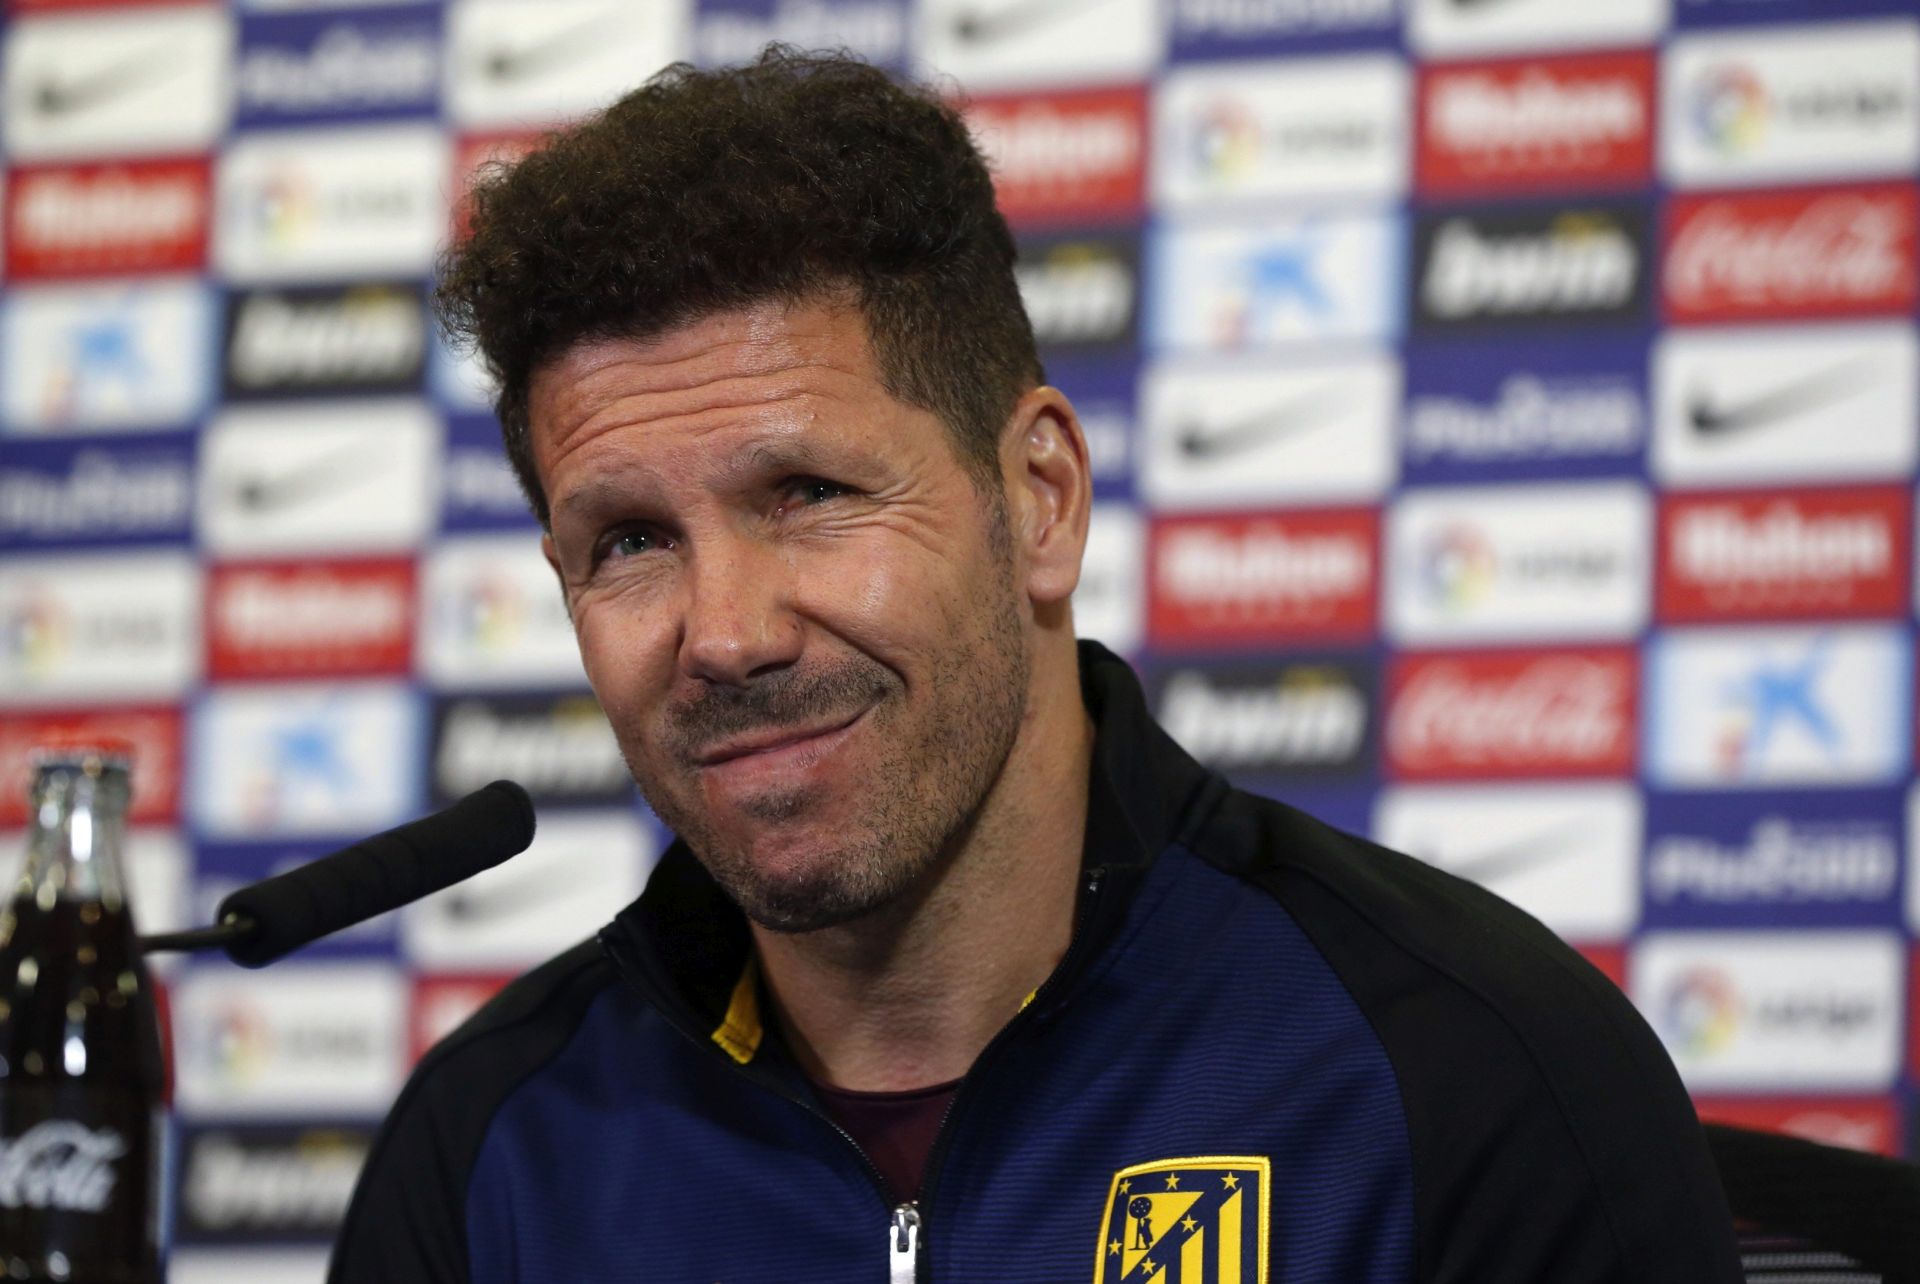 epa05925675 Atletico Madrid's Argentinian head coach Diego Simeone during the press conference held at Vicente Calderon stadium in Madrid, Spain on 24 April 2017 on the eve of their Primera Division soccer match against Villarreal.  EPA/KIKO HUESCA